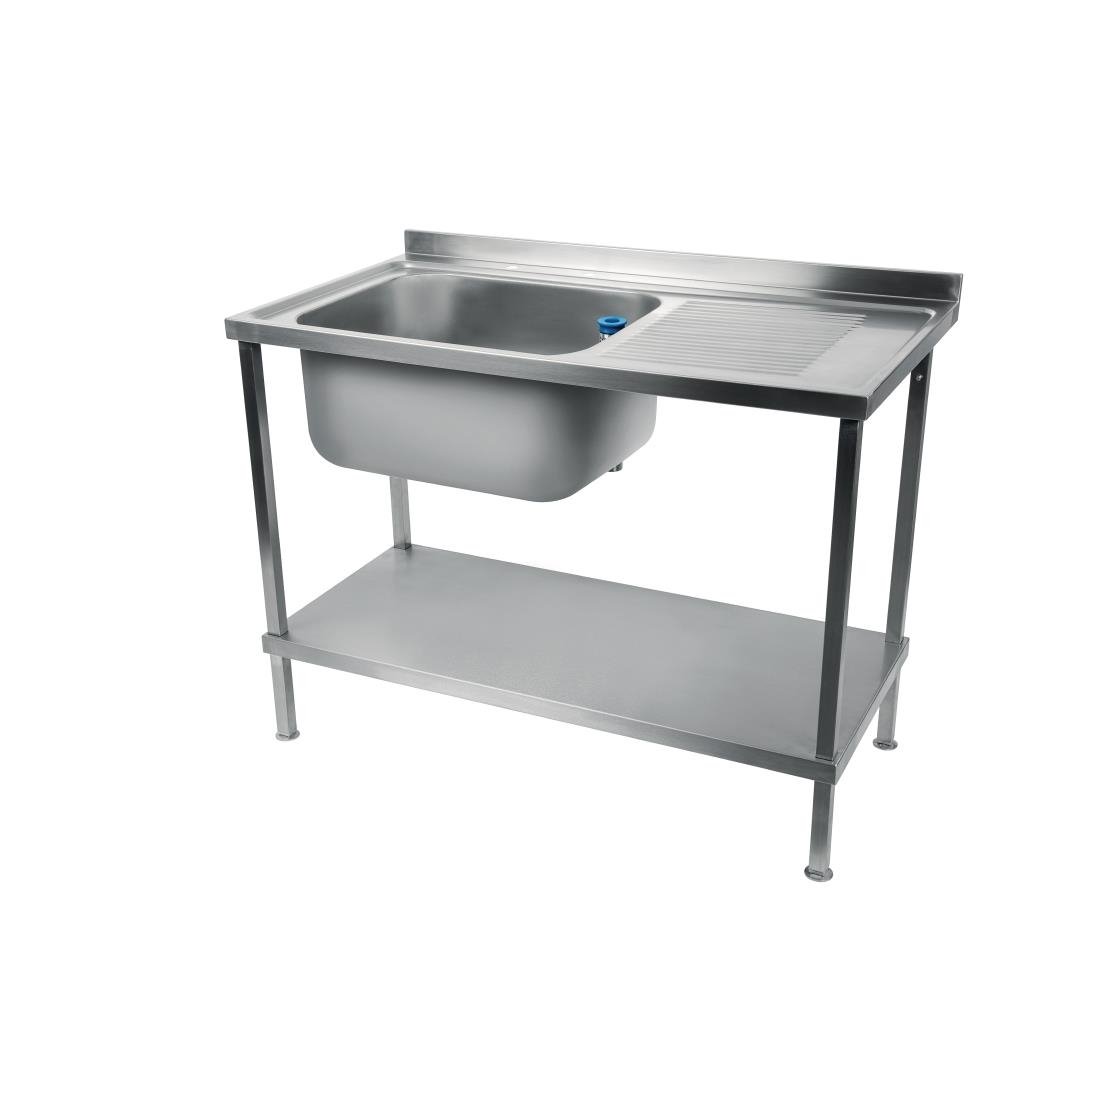 DR386 Holmes Fully Assembled Stainless Steel Sink Right Hand Drainer 1500mm JD Catering Equipment Solutions Ltd